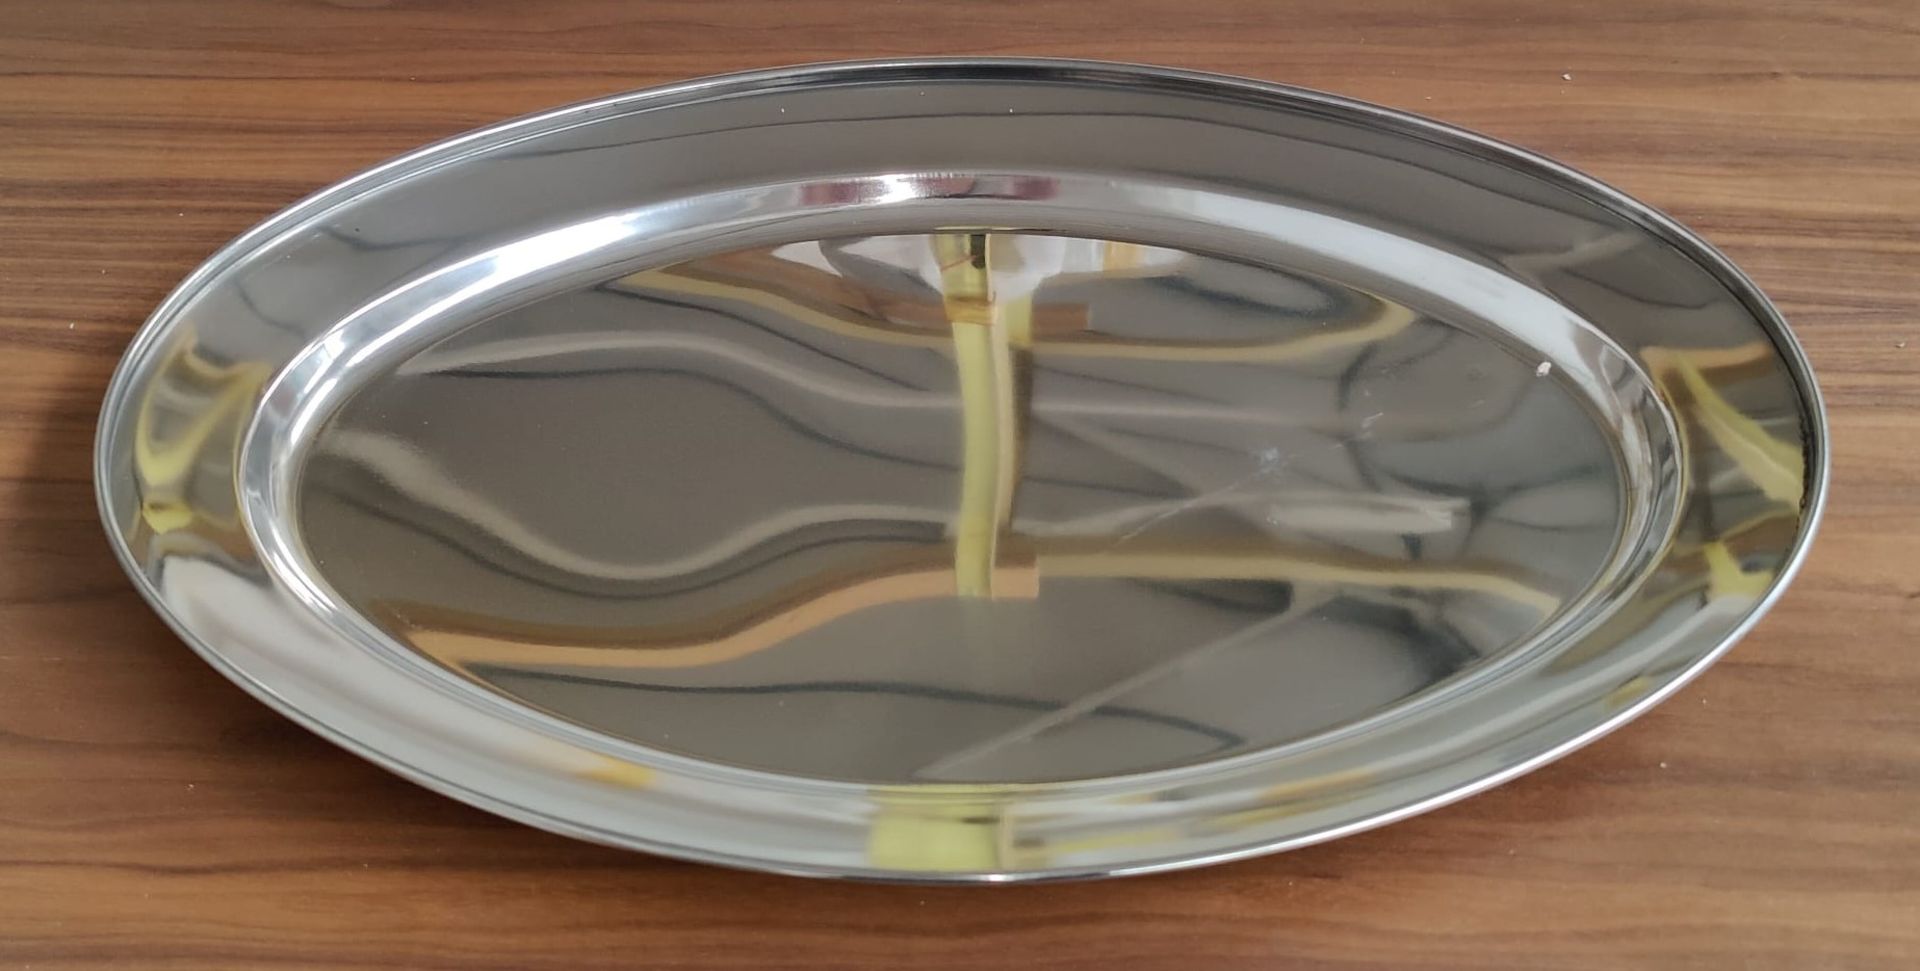 20 x Stainless Steel Oval Service Trays - Size: 450mm x 310mm - Brand New Boxed Stock - RRP £200 - Image 8 of 8